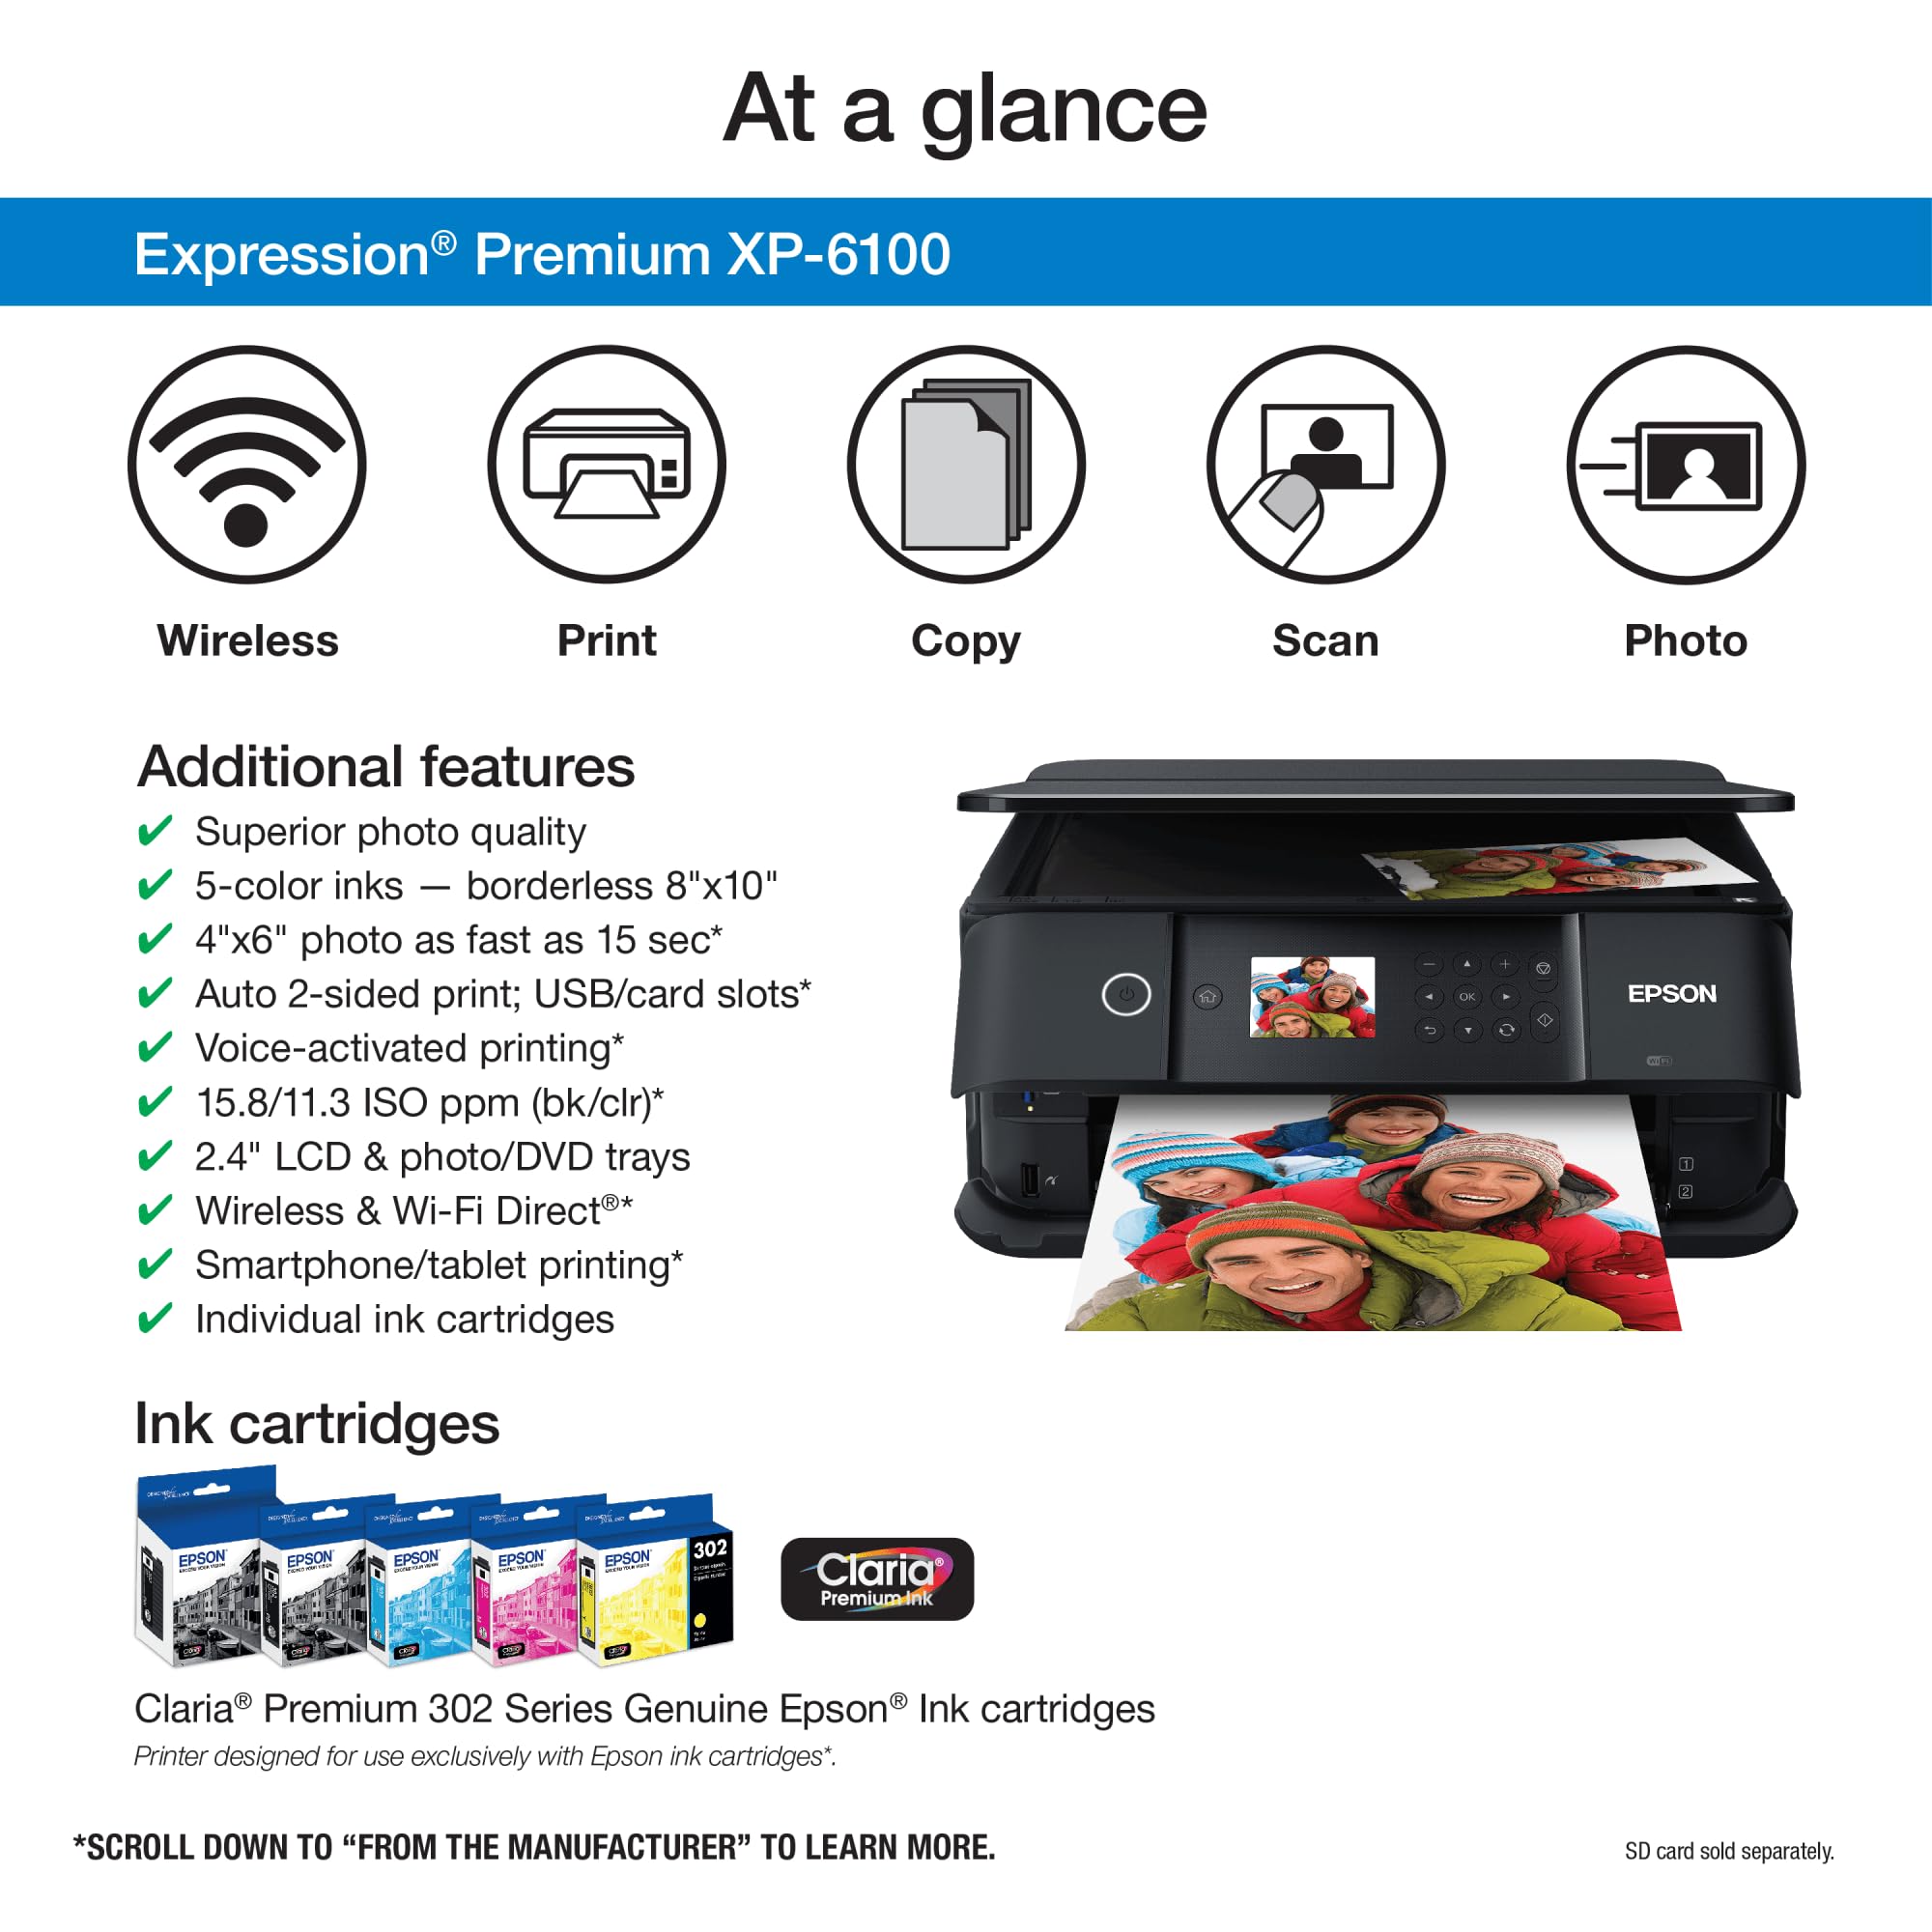 Epson Expression Premium Wireless Color Photo Printer with ADF, Scanner and Copier, Black  - Like New